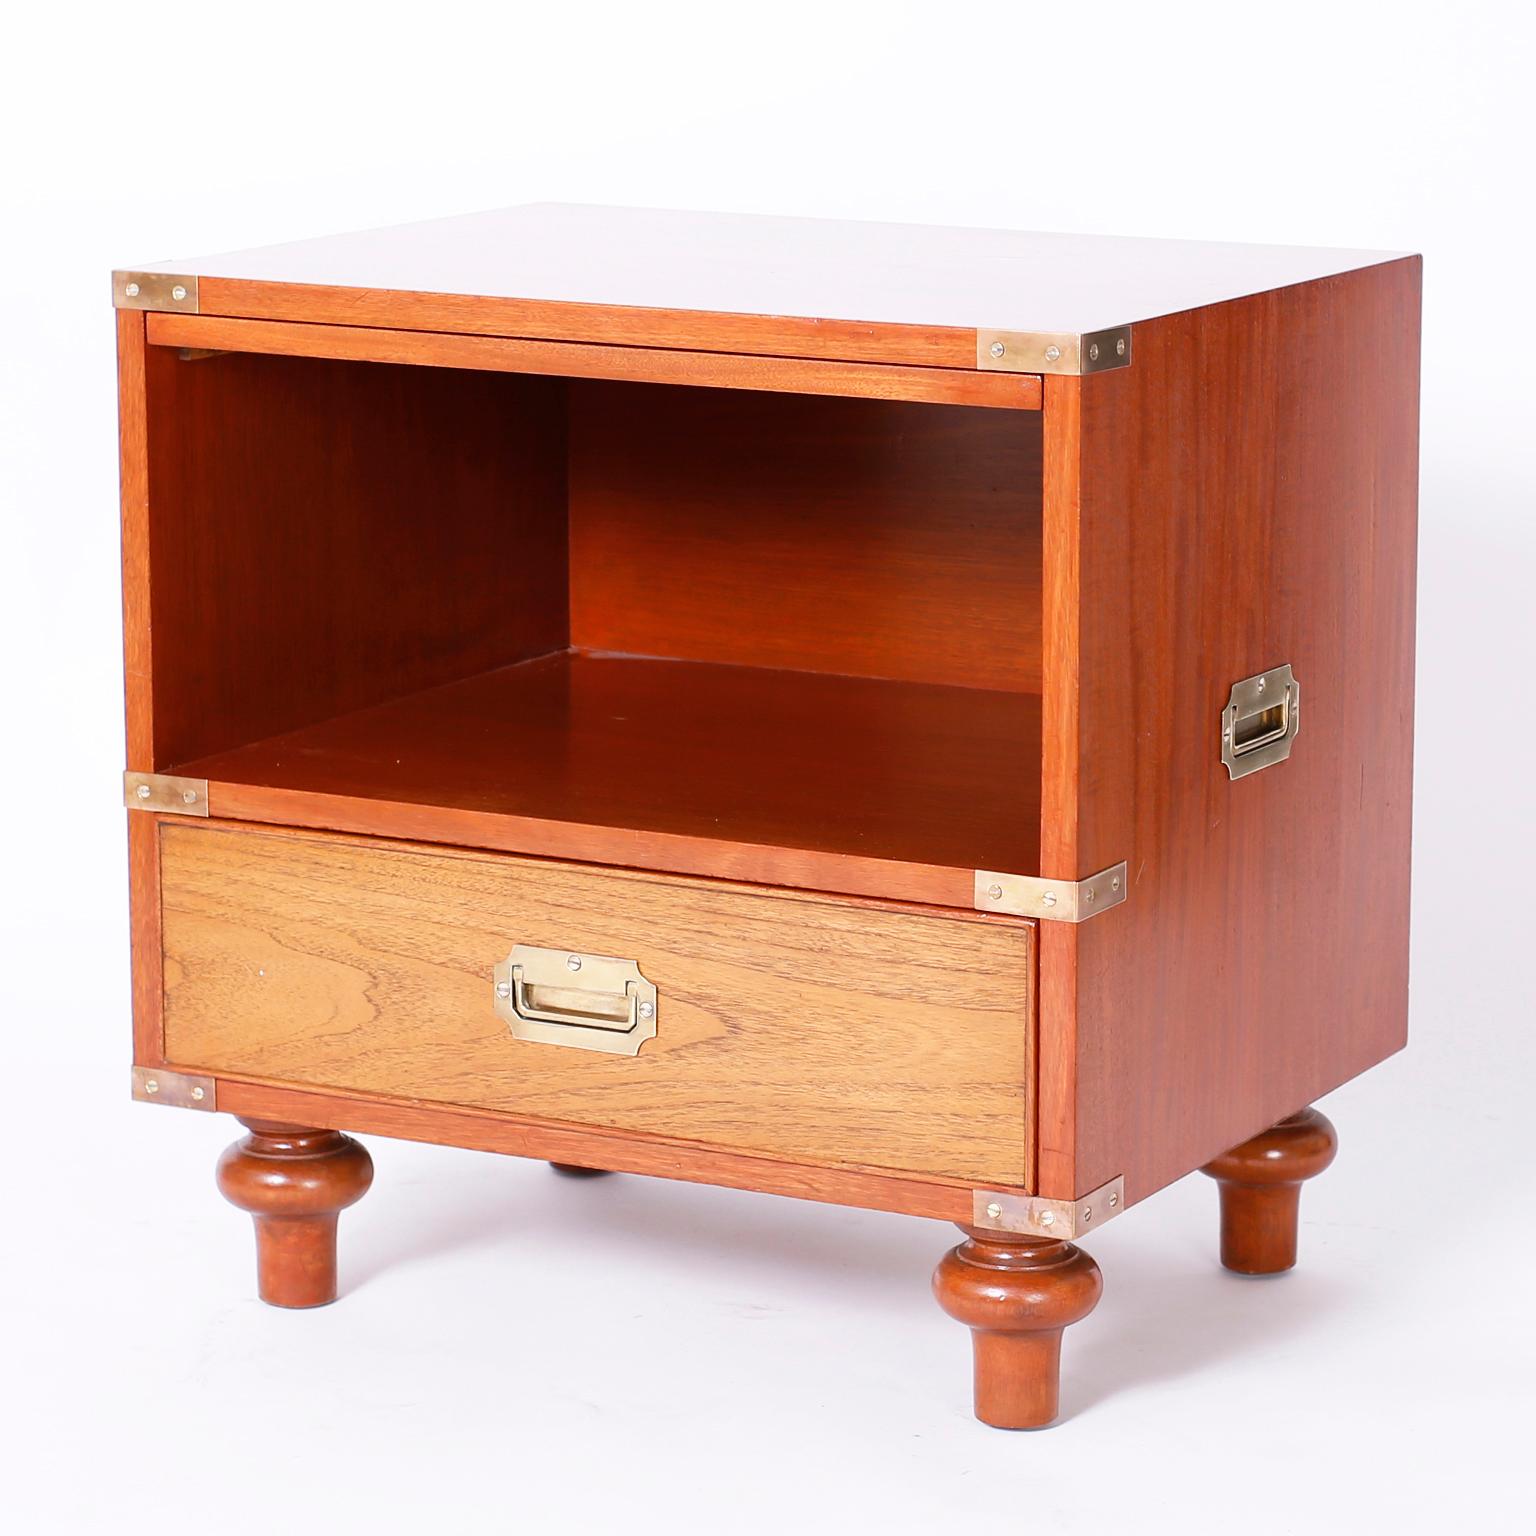 British Colonial Midcentury Pair of Campaign Style Nightstands by Beacon Hill